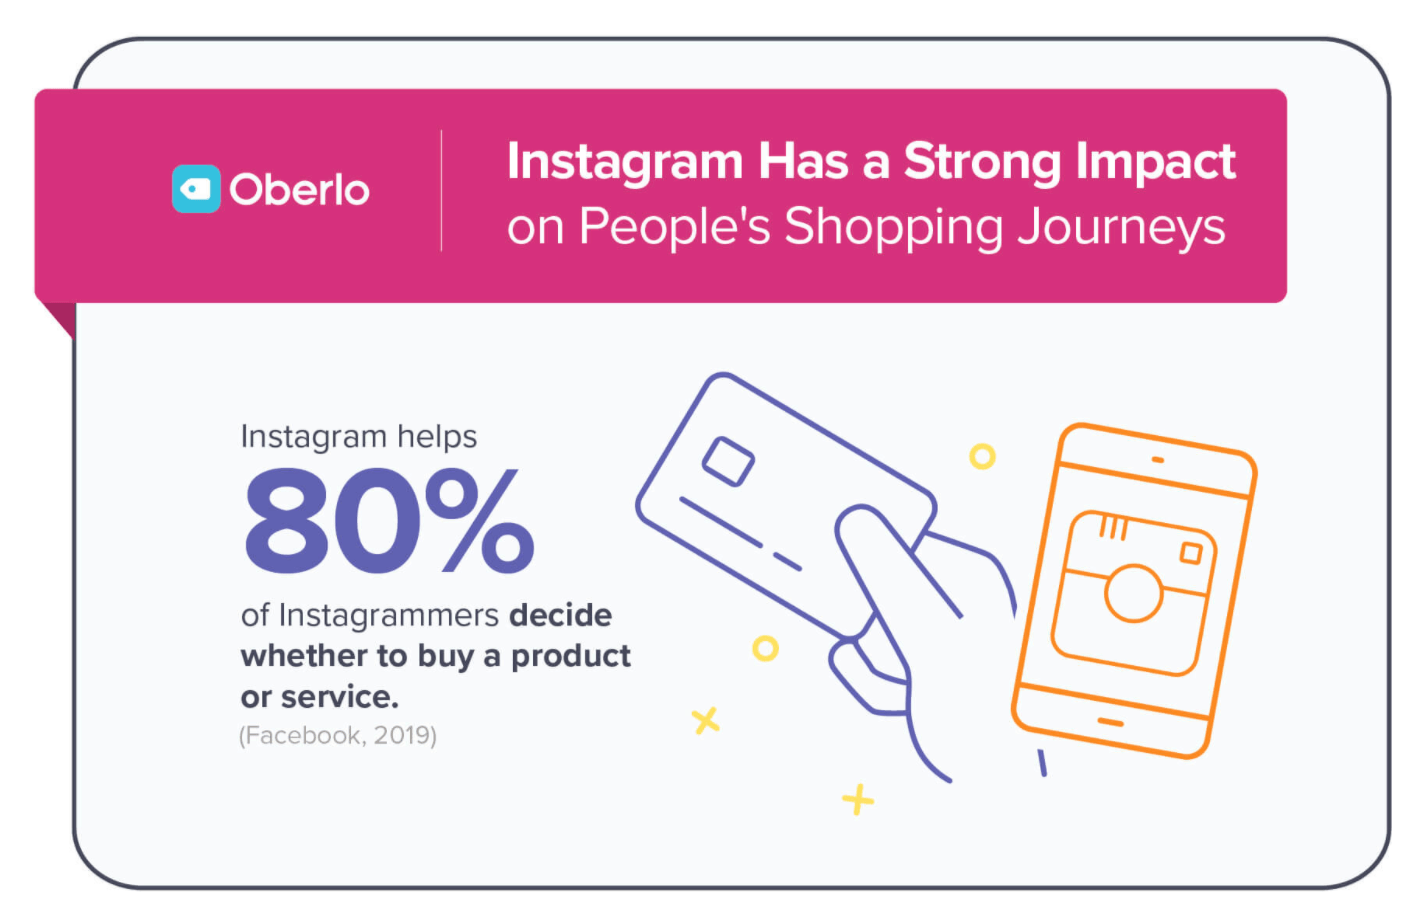 Instagram influences people's purchase decisions